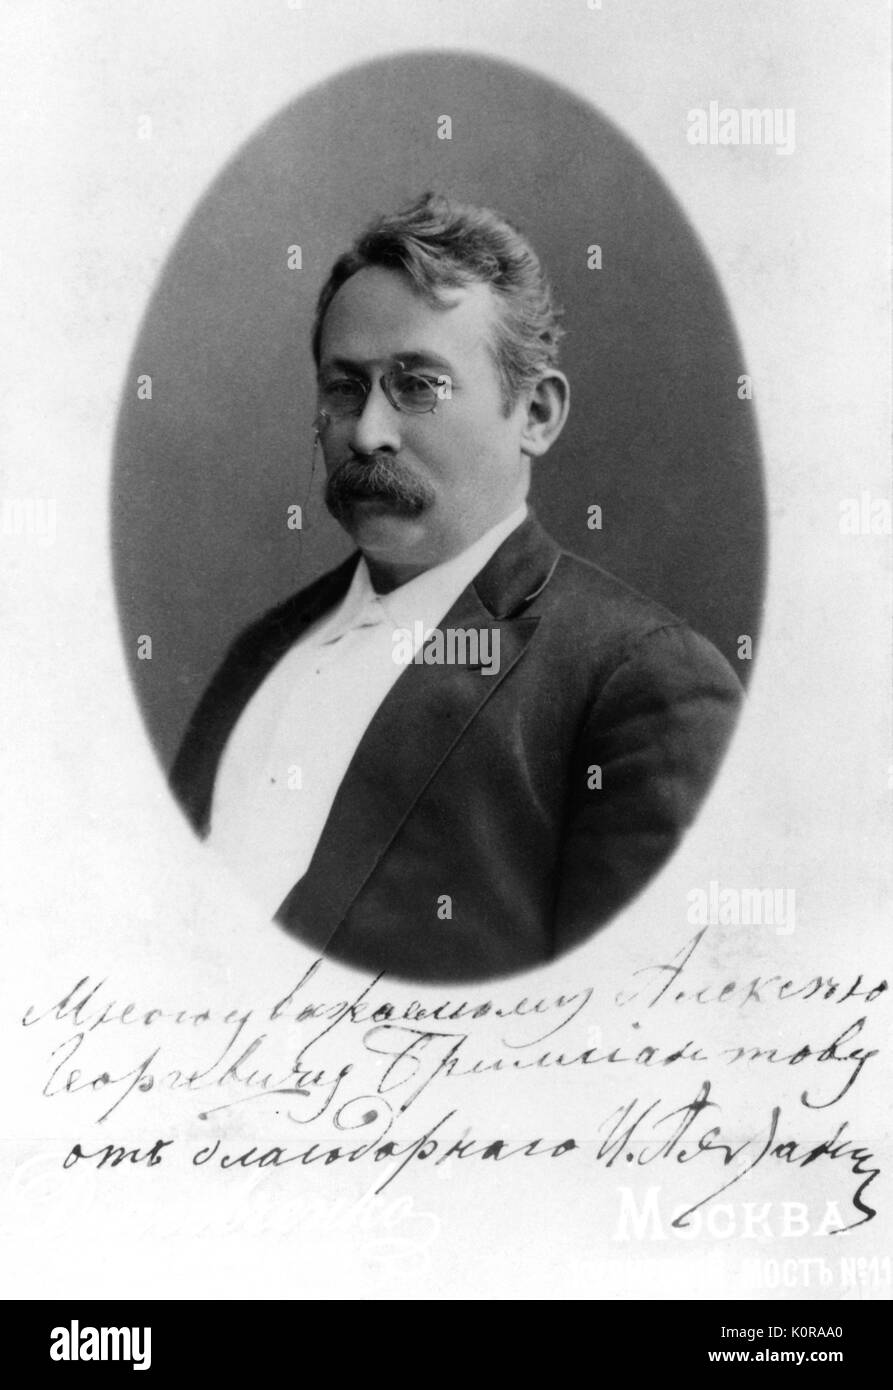 TCHAIKOVSKY - MAZEPPA Ippolit Altani (1846-1919), conducted first Moscow production of Mazeppa, 1884 Russian composer (1840-1893) Stock Photo